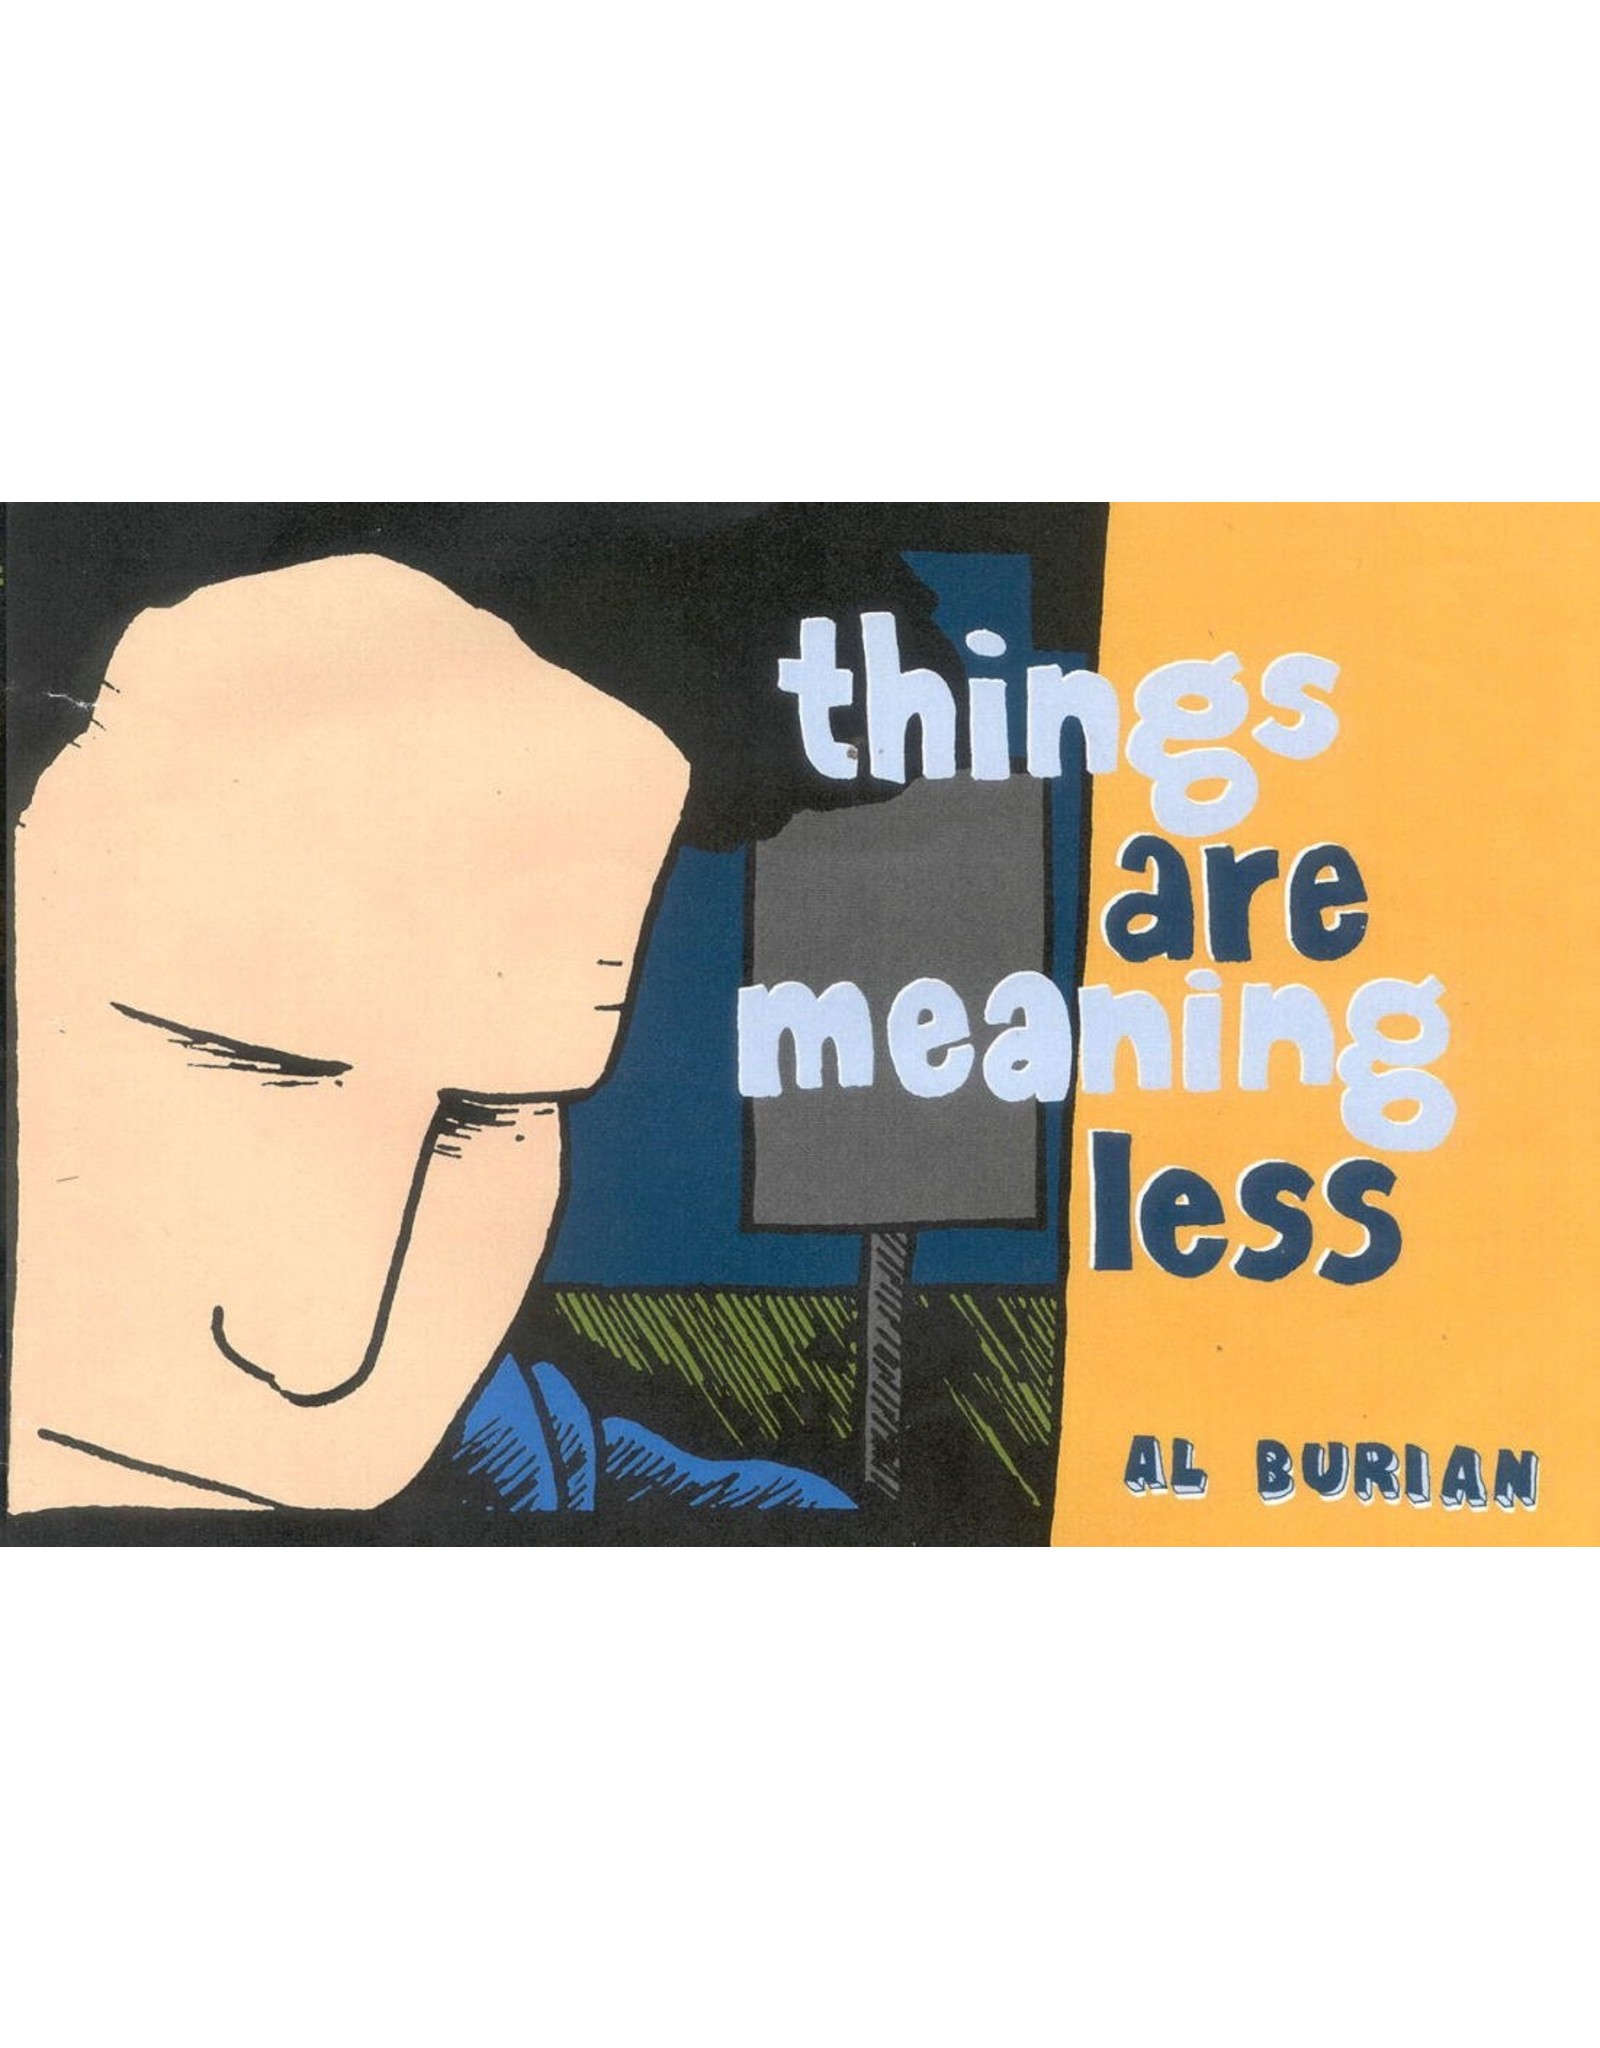 Literature Things are Meaningless